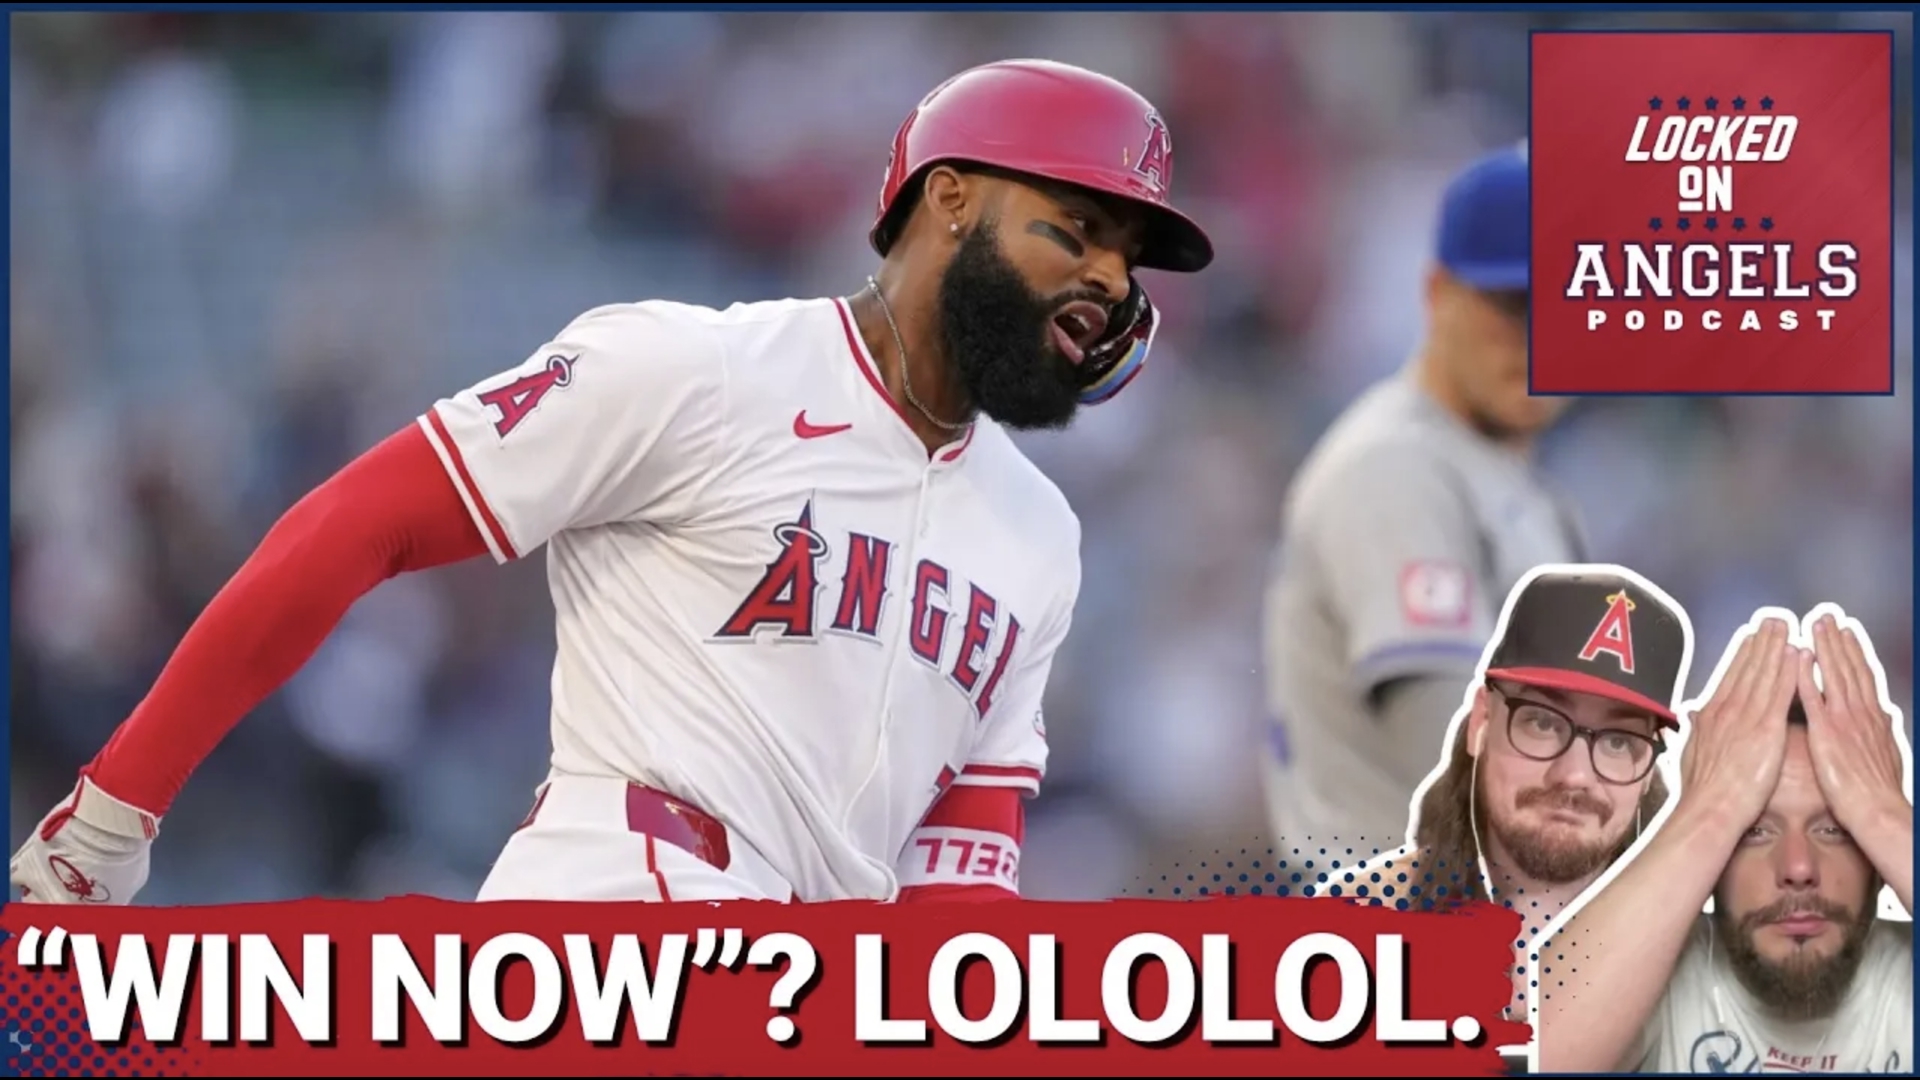 The Los Angeles Angels failed to win another series in this four-game meeting between the Halos and the Kansas City Royals this past weekend,